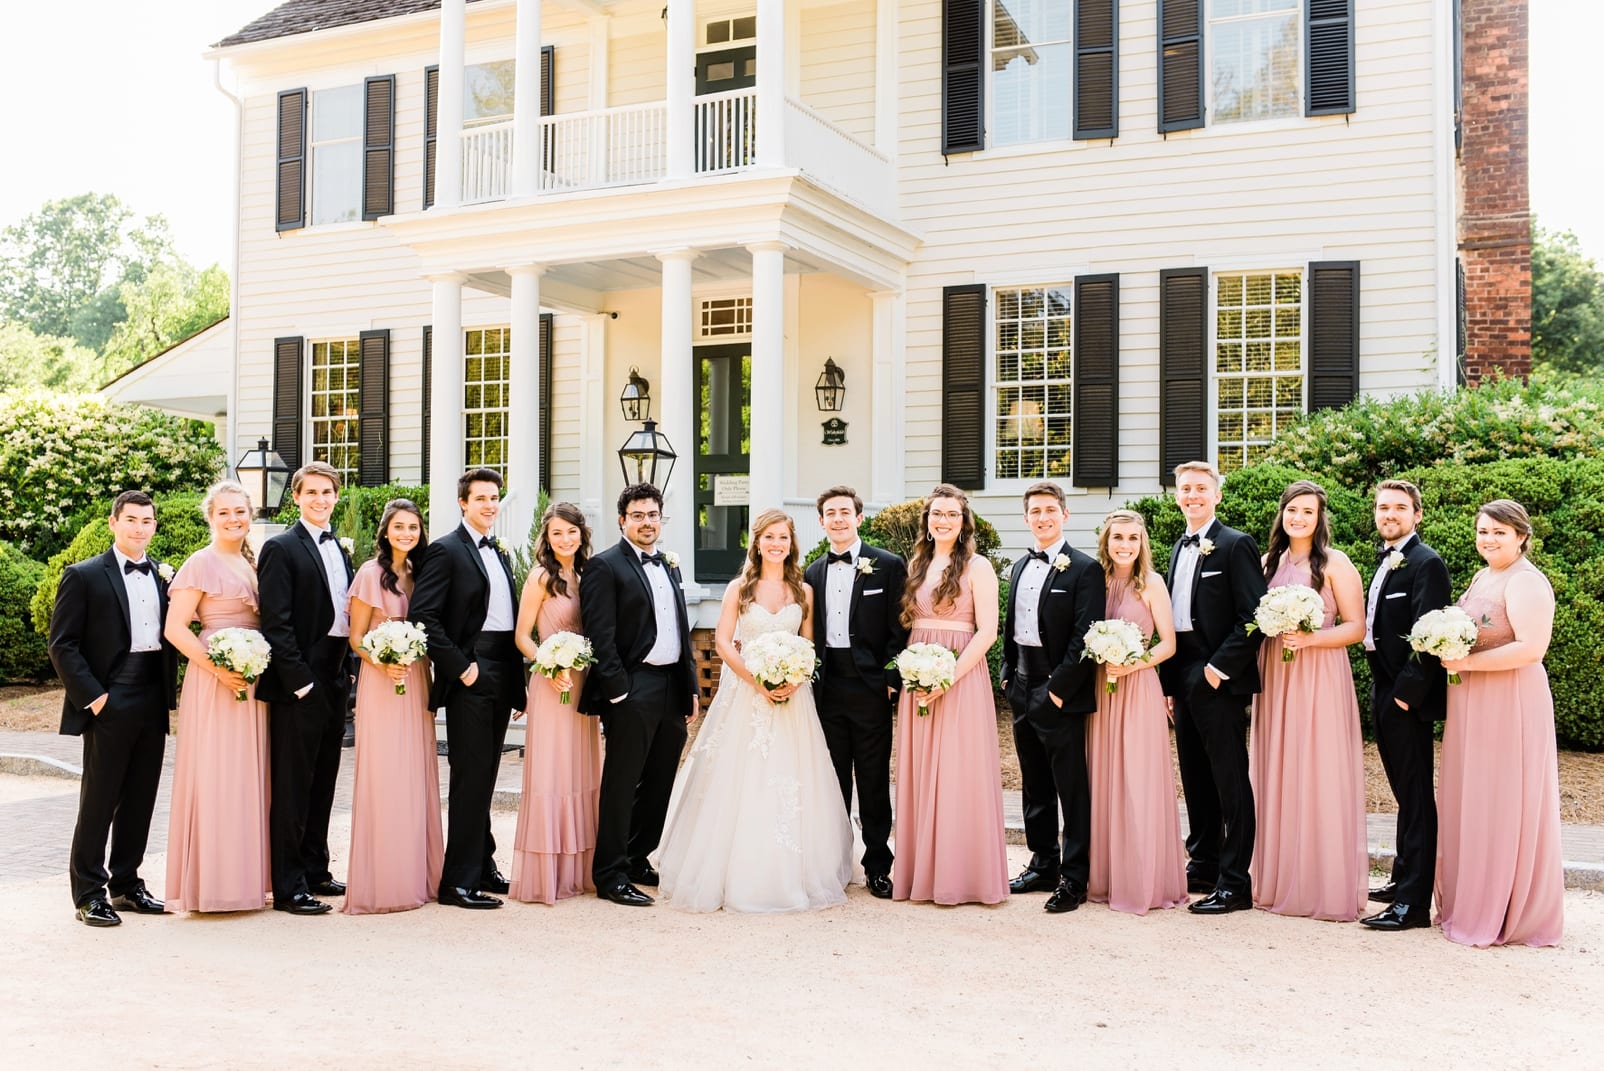 Sutherland bride and groom with wedding party standing in front of the main house photo